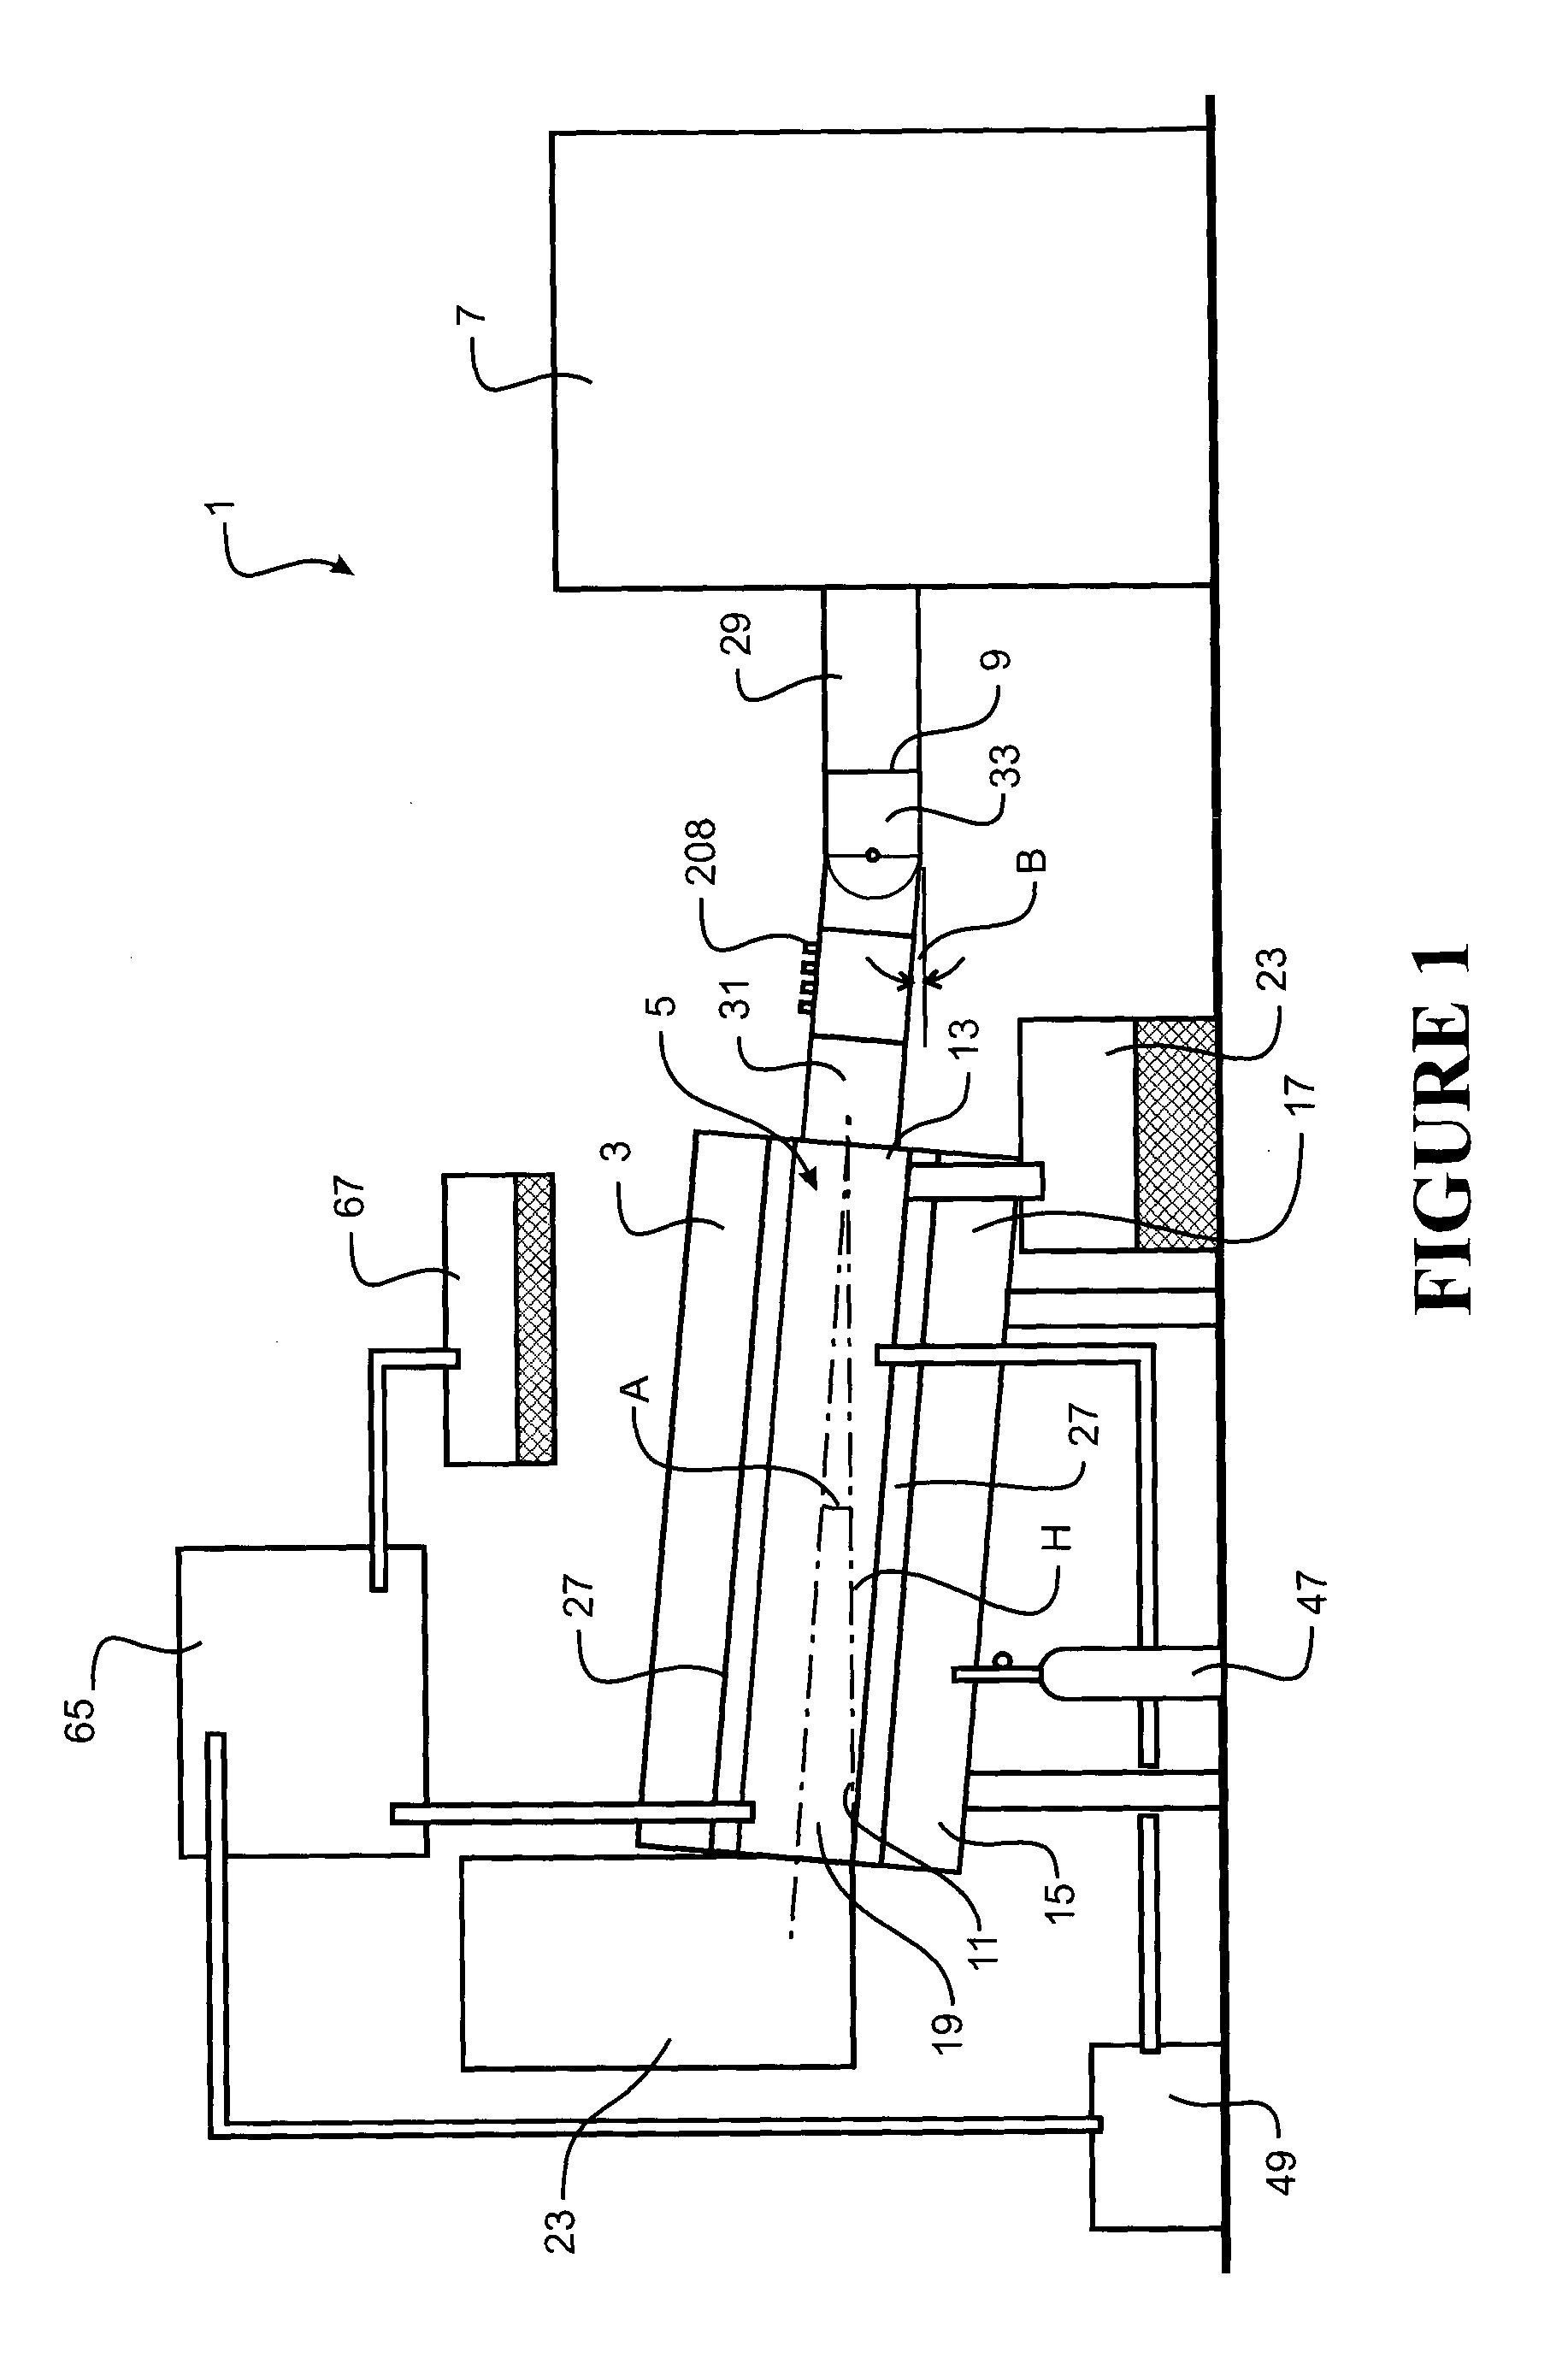 Apparatus and method for processing biomass